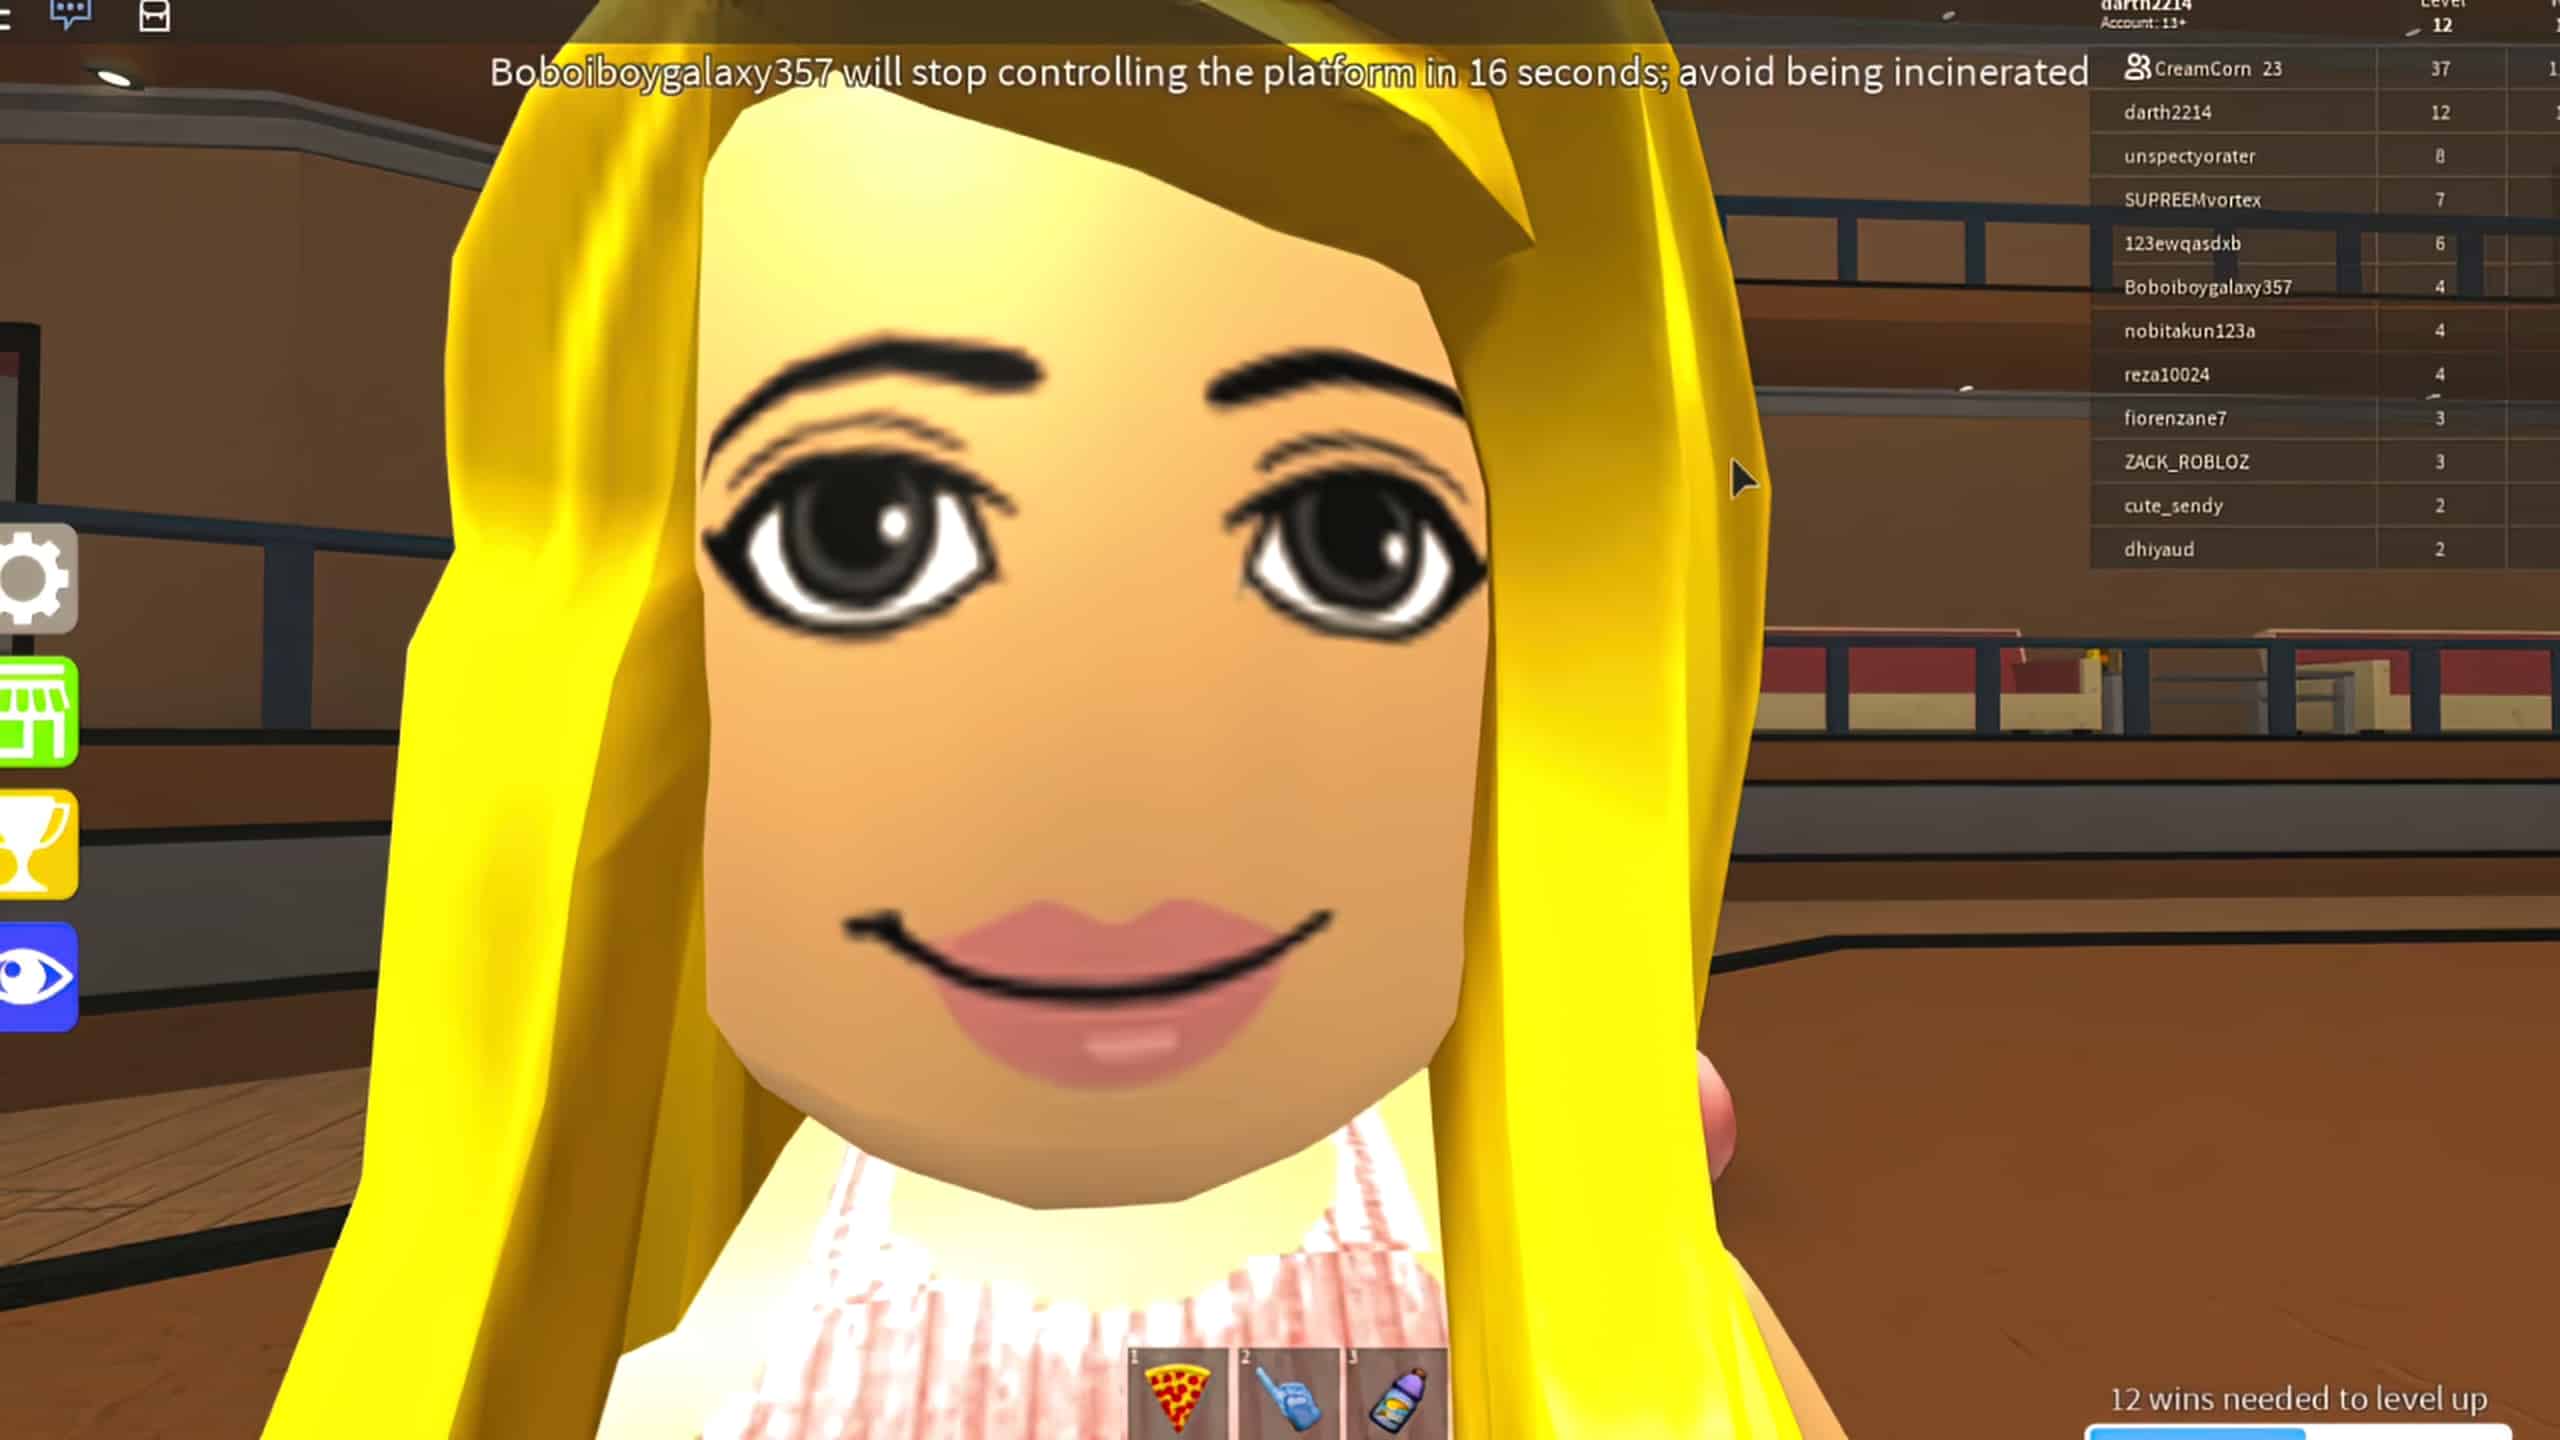 Someone said the face I drew looked like the Roblox woman's face